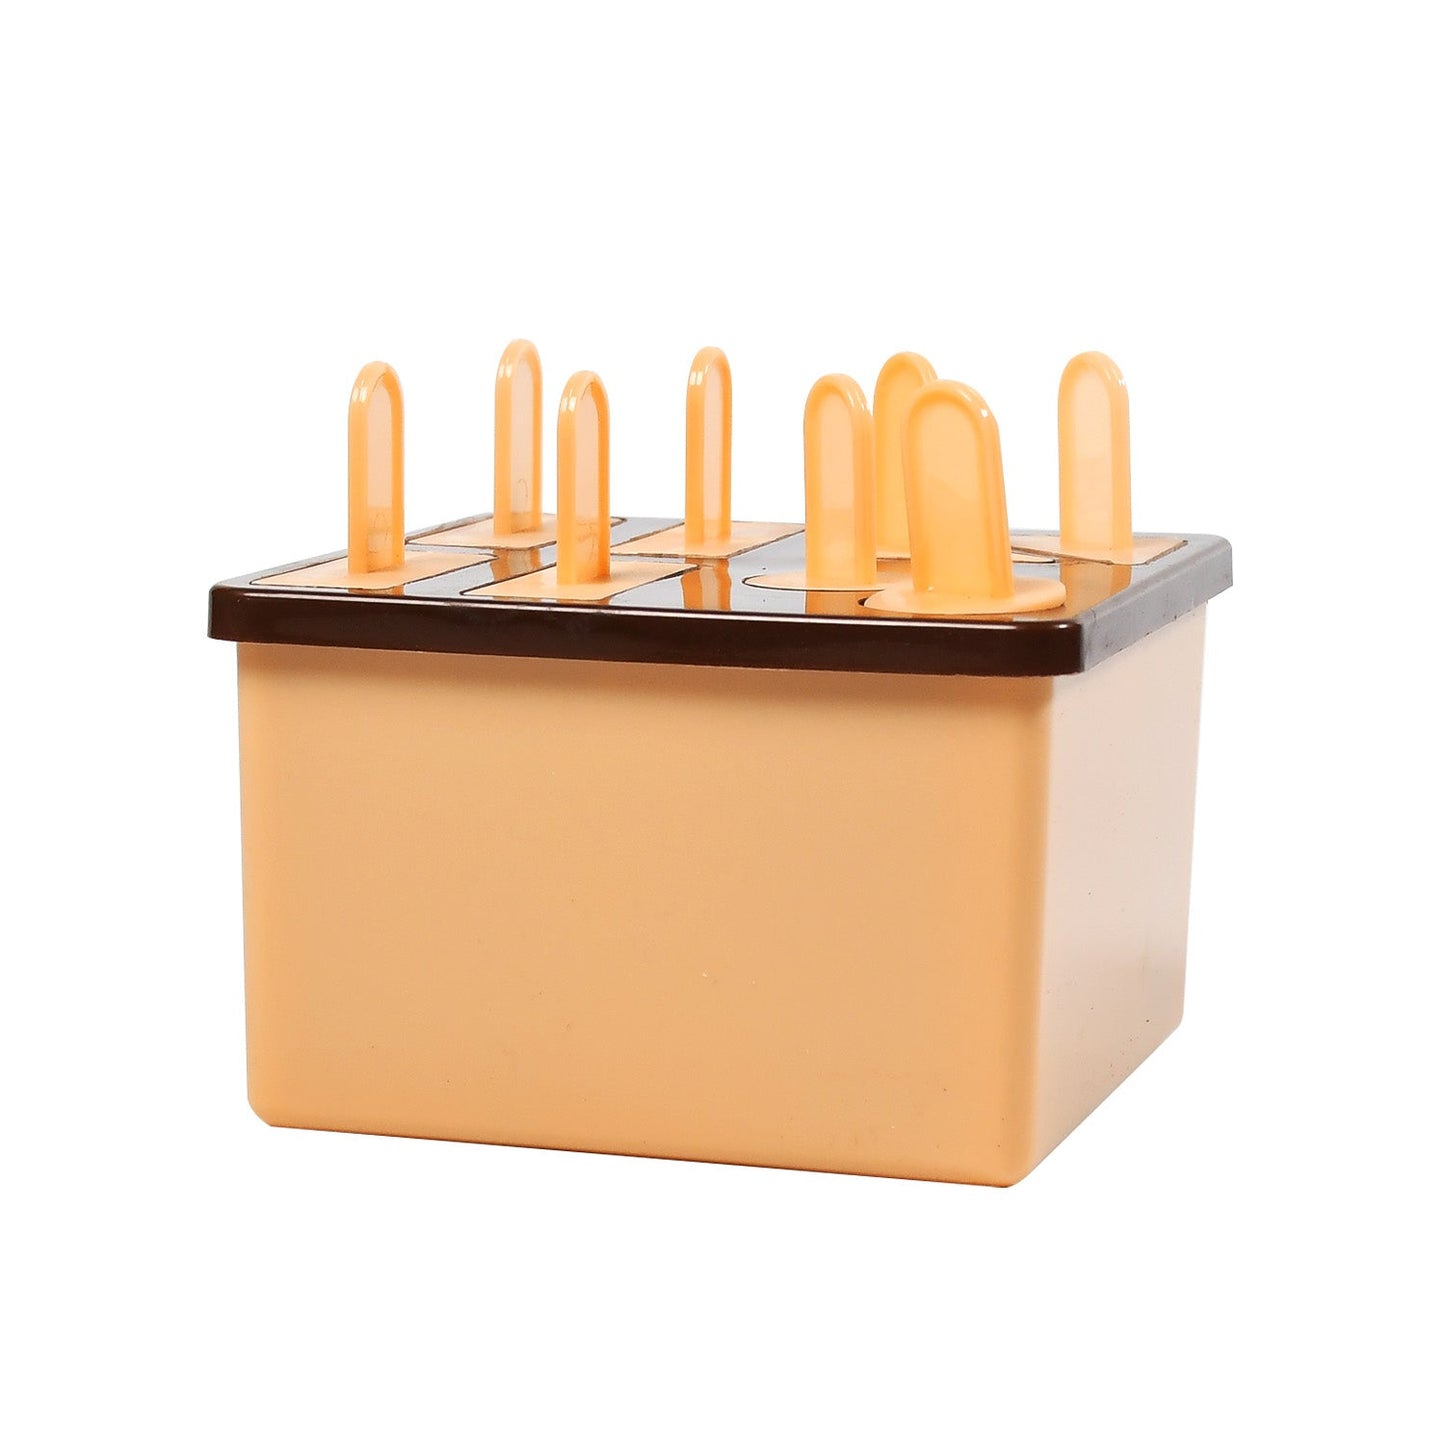 6316B  Plastic Kulfi Mould, Kulfi Moulds 8 pcs Tray Ice Cream Mould Reusable Frozen Kulfi Maker Popsicle Sticks Lolly Ice Popsicle Candy Mould for Children pink Color Brown Box 